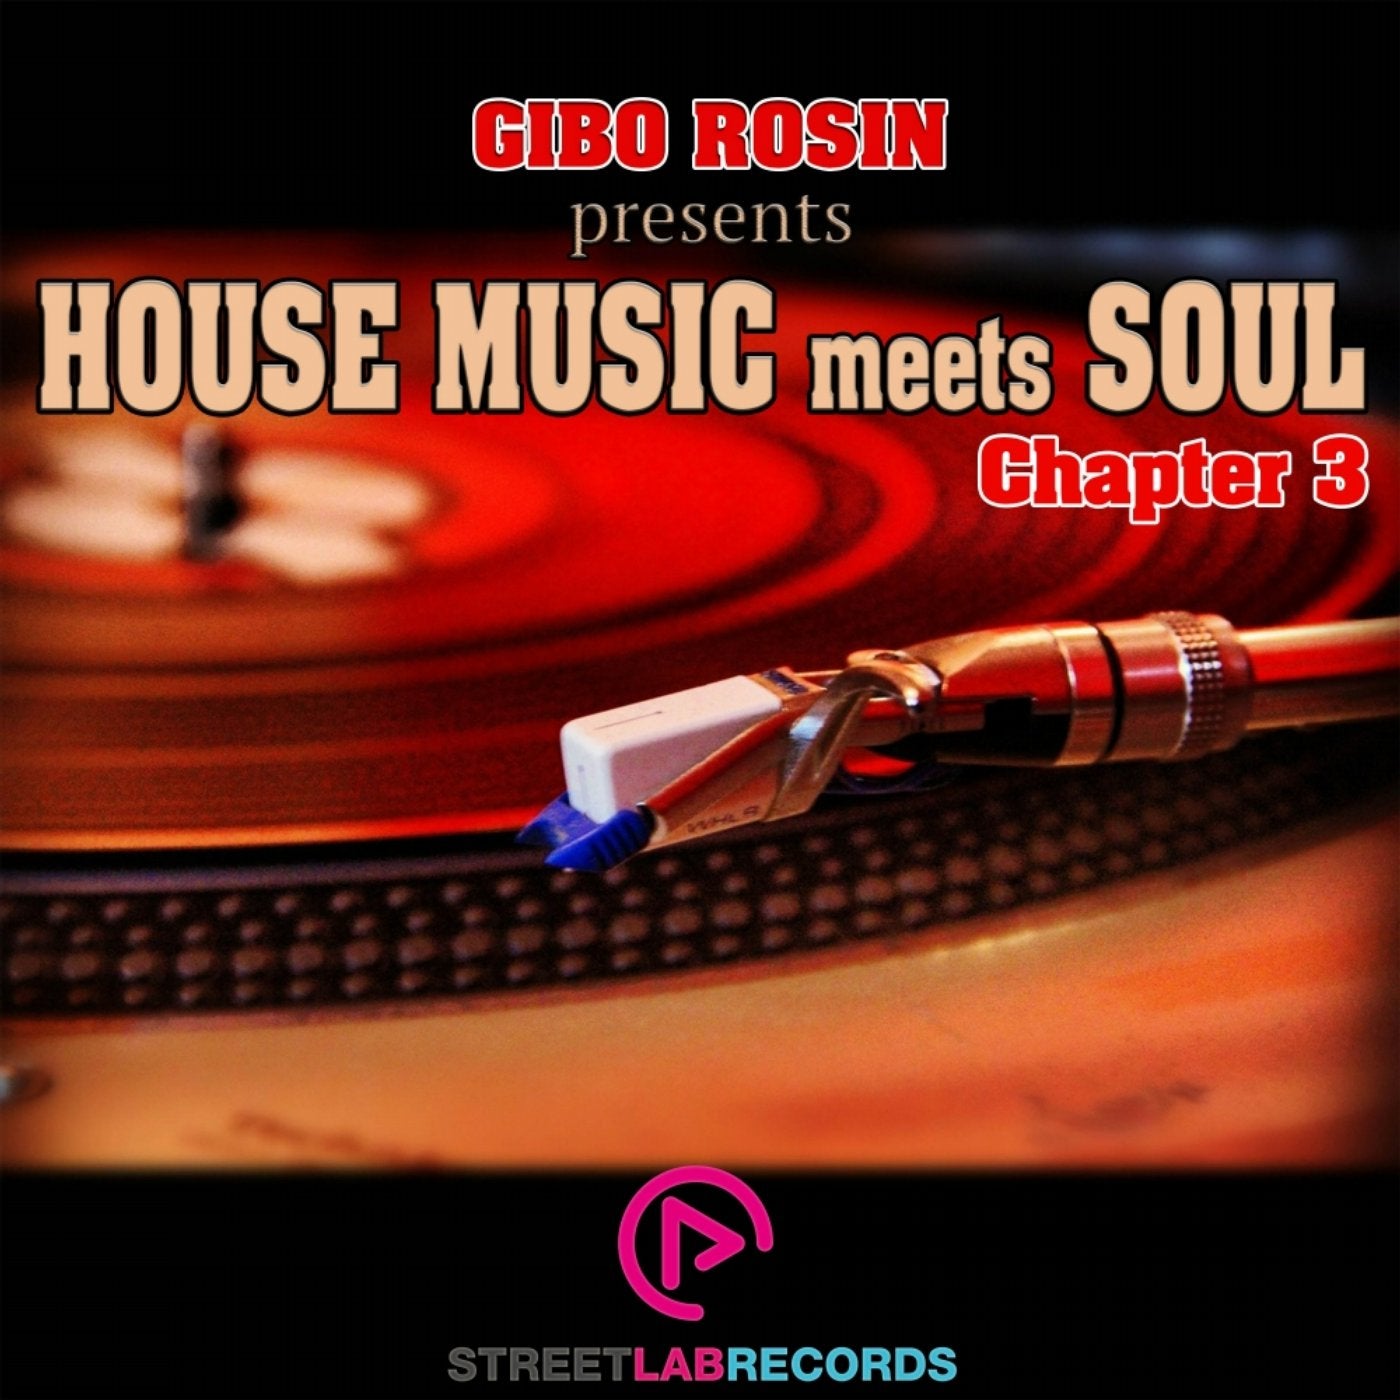 Gibo Rosin Presents House Music Meets Soul: Chapter 3